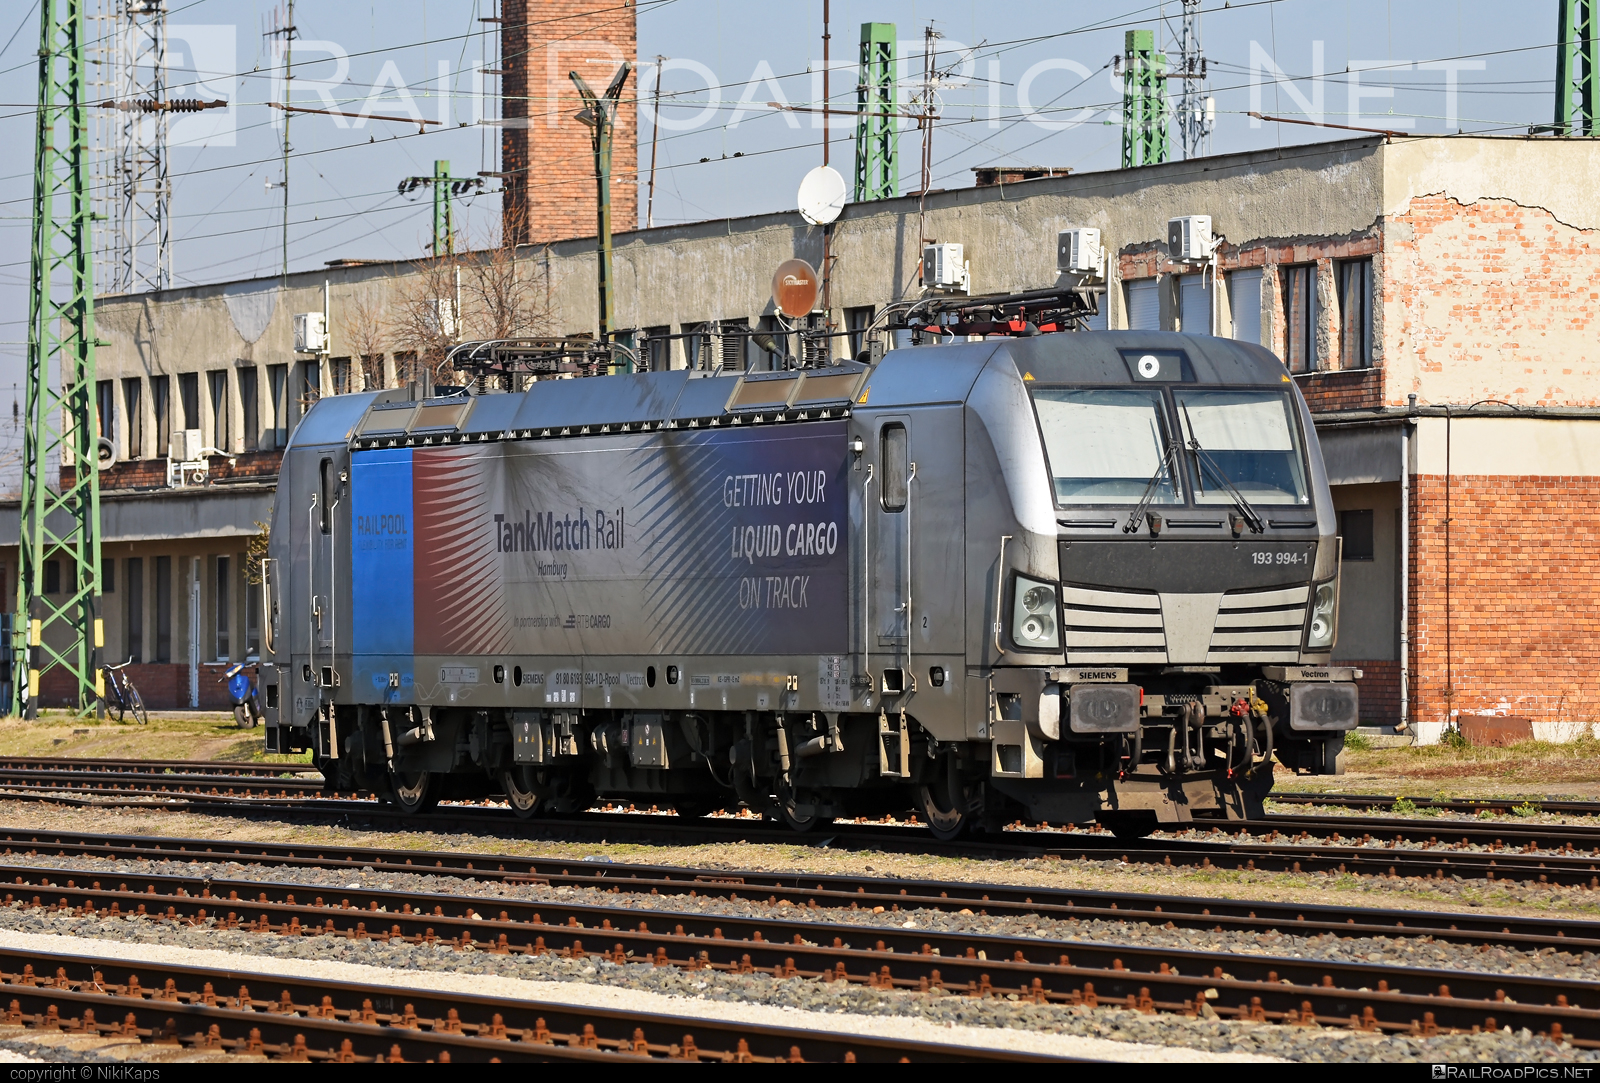 Siemens Vectron AC - 193 994-1 operated by RTB Cargo GmbH #railpool #railpoolgmbh #rtb #rtbcargo #siemens #siemensVectron #siemensVectronAC #vectron #vectronAC